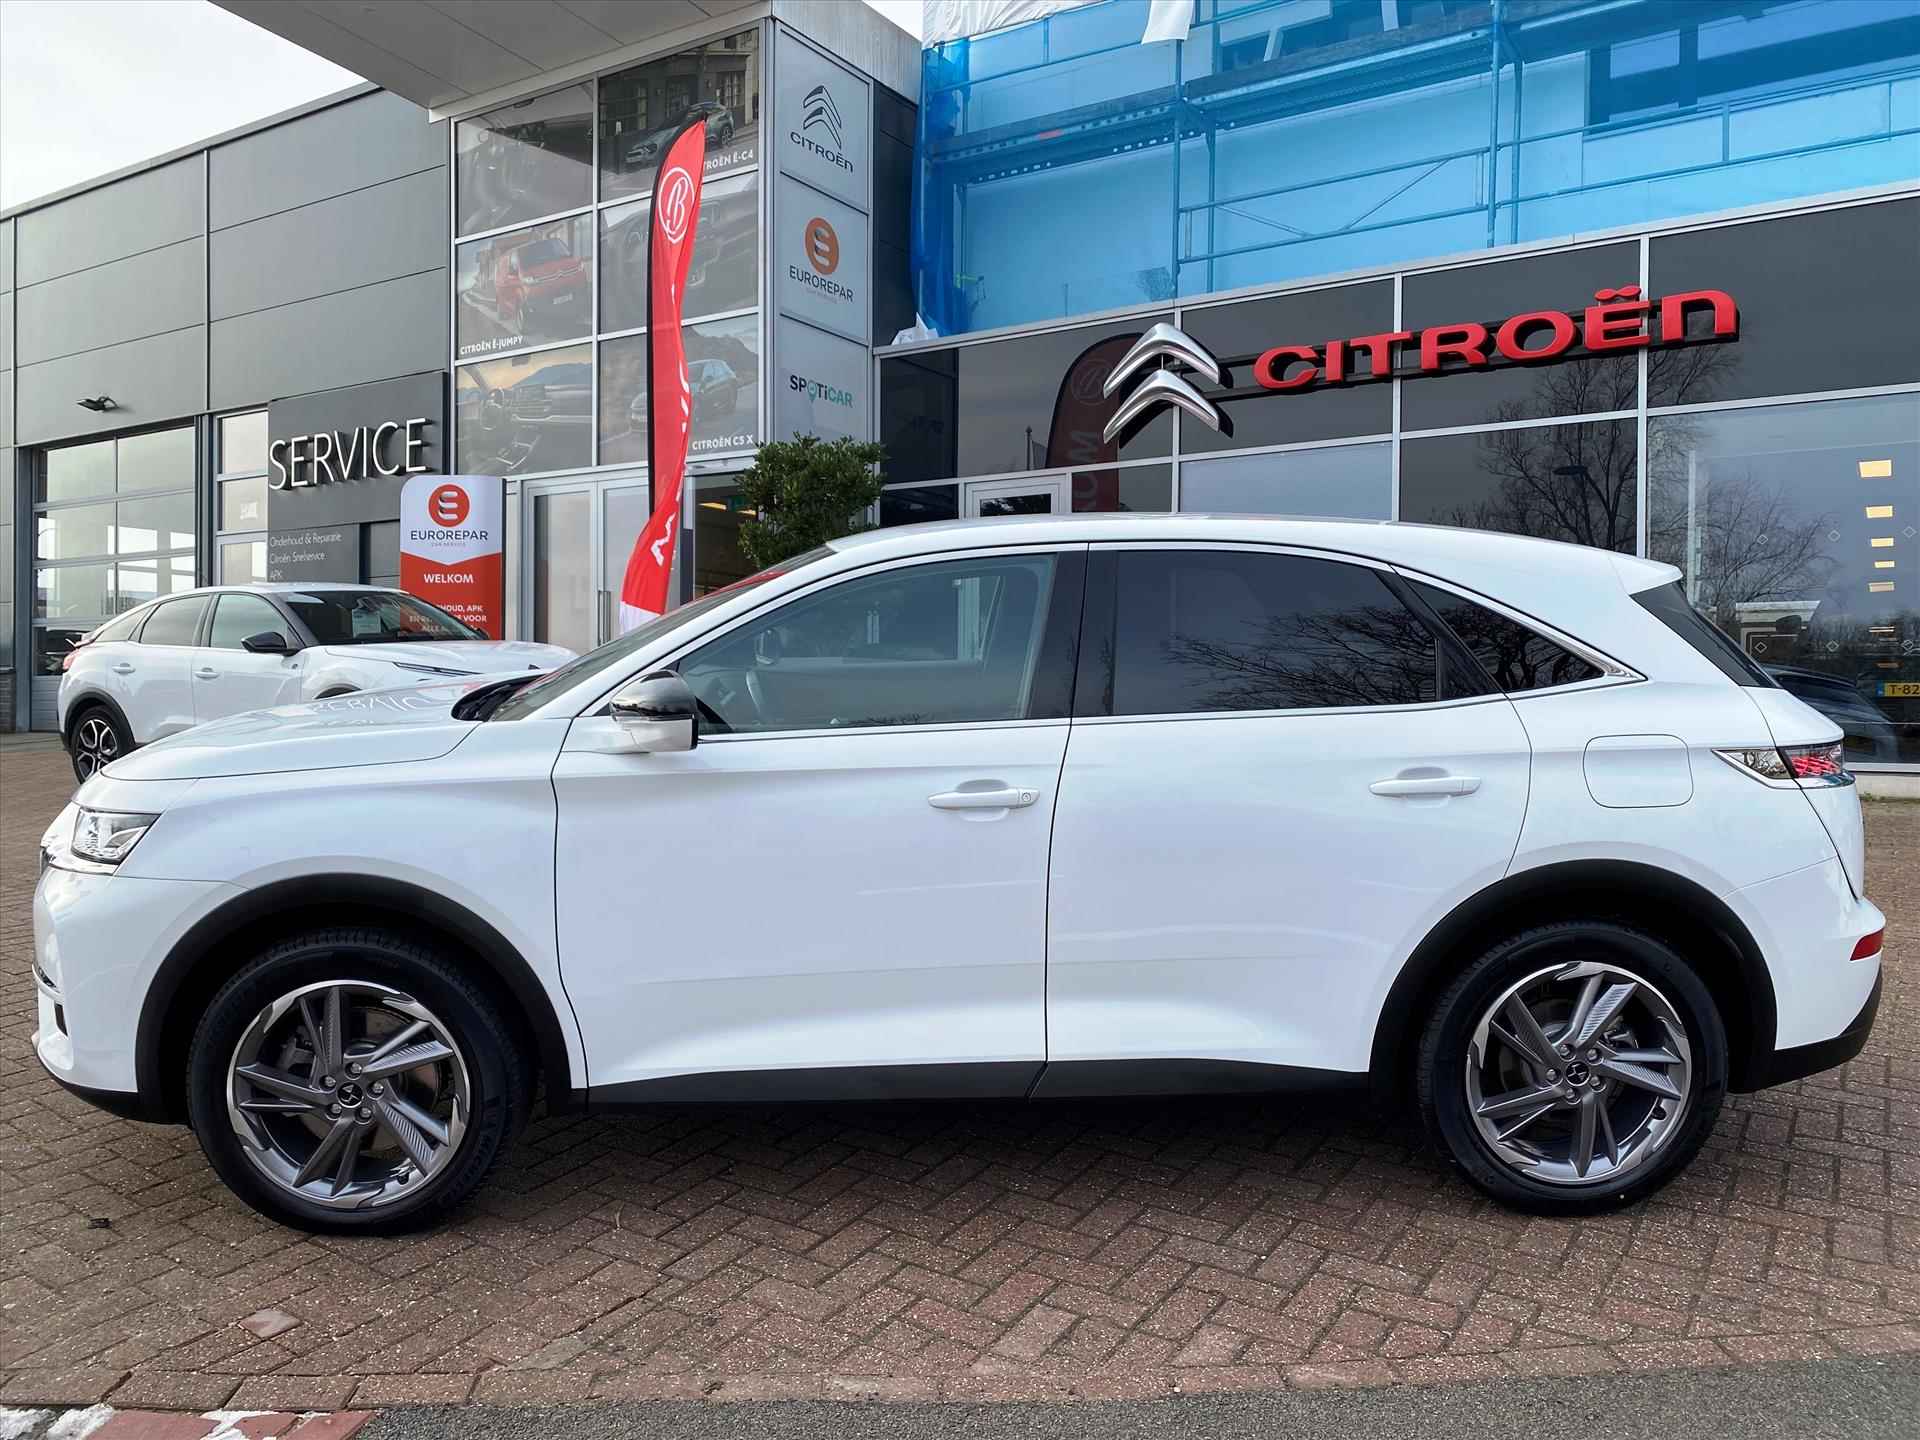 DS Ds 7 Crossback 1.6 E-TENSE 225pk Automaat Business Hybrid |camera, parkeersensoren voor en achter, dab, 19 inch velgen, apple car play, android auto, climate, cruise - 3/61